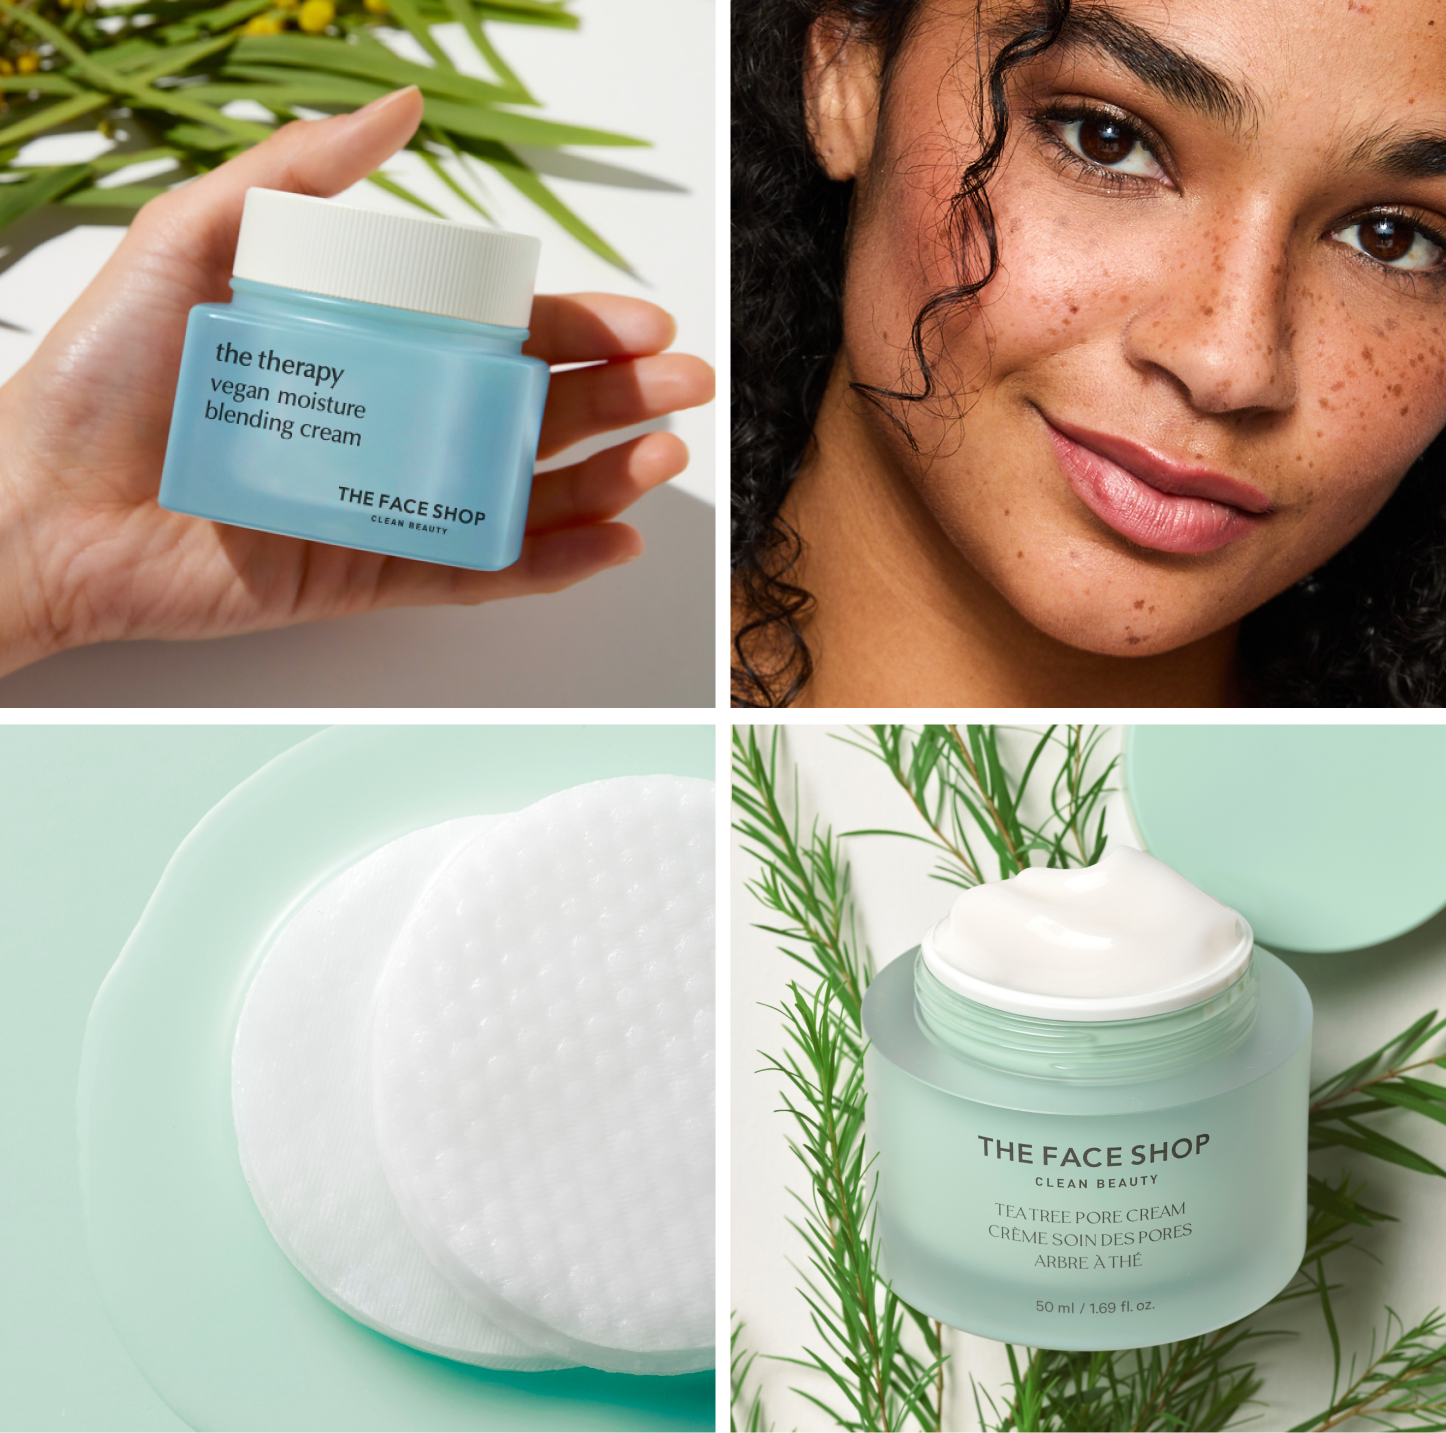 a combination of four pictures: top left - a hand holding a light blue jar of The Face Shop Vegan Moisture Blending Cream; top right - a model slightly smiling, looking at the viewer; bottom left - two The Face Shop Tea Tree Toner Pads over a spread of light green cream; bottom right - light green jar of The Face Shop Tea Tree Pore Cream